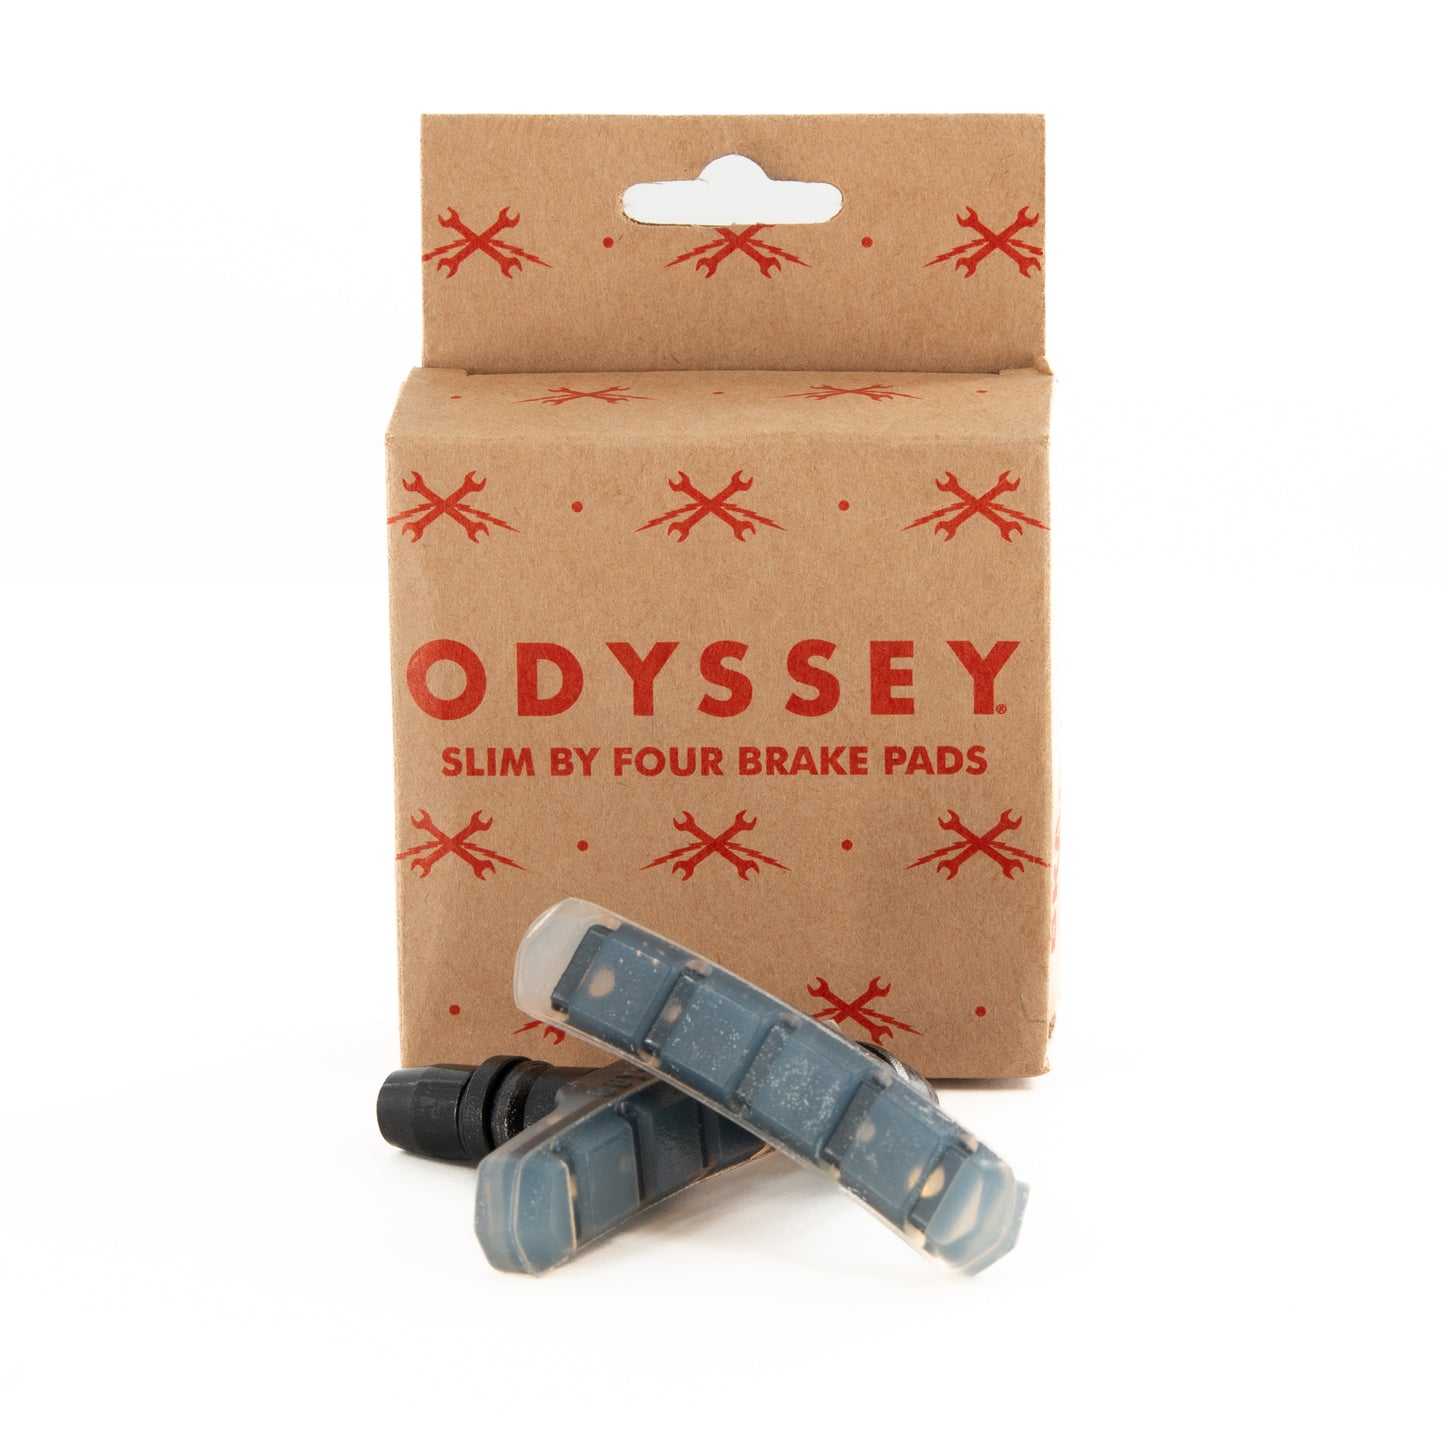 ODYSSEY SLIM BY FOUR BRAKE PADS (THREADED) (CLEAR) (SOFT COMPOUND)